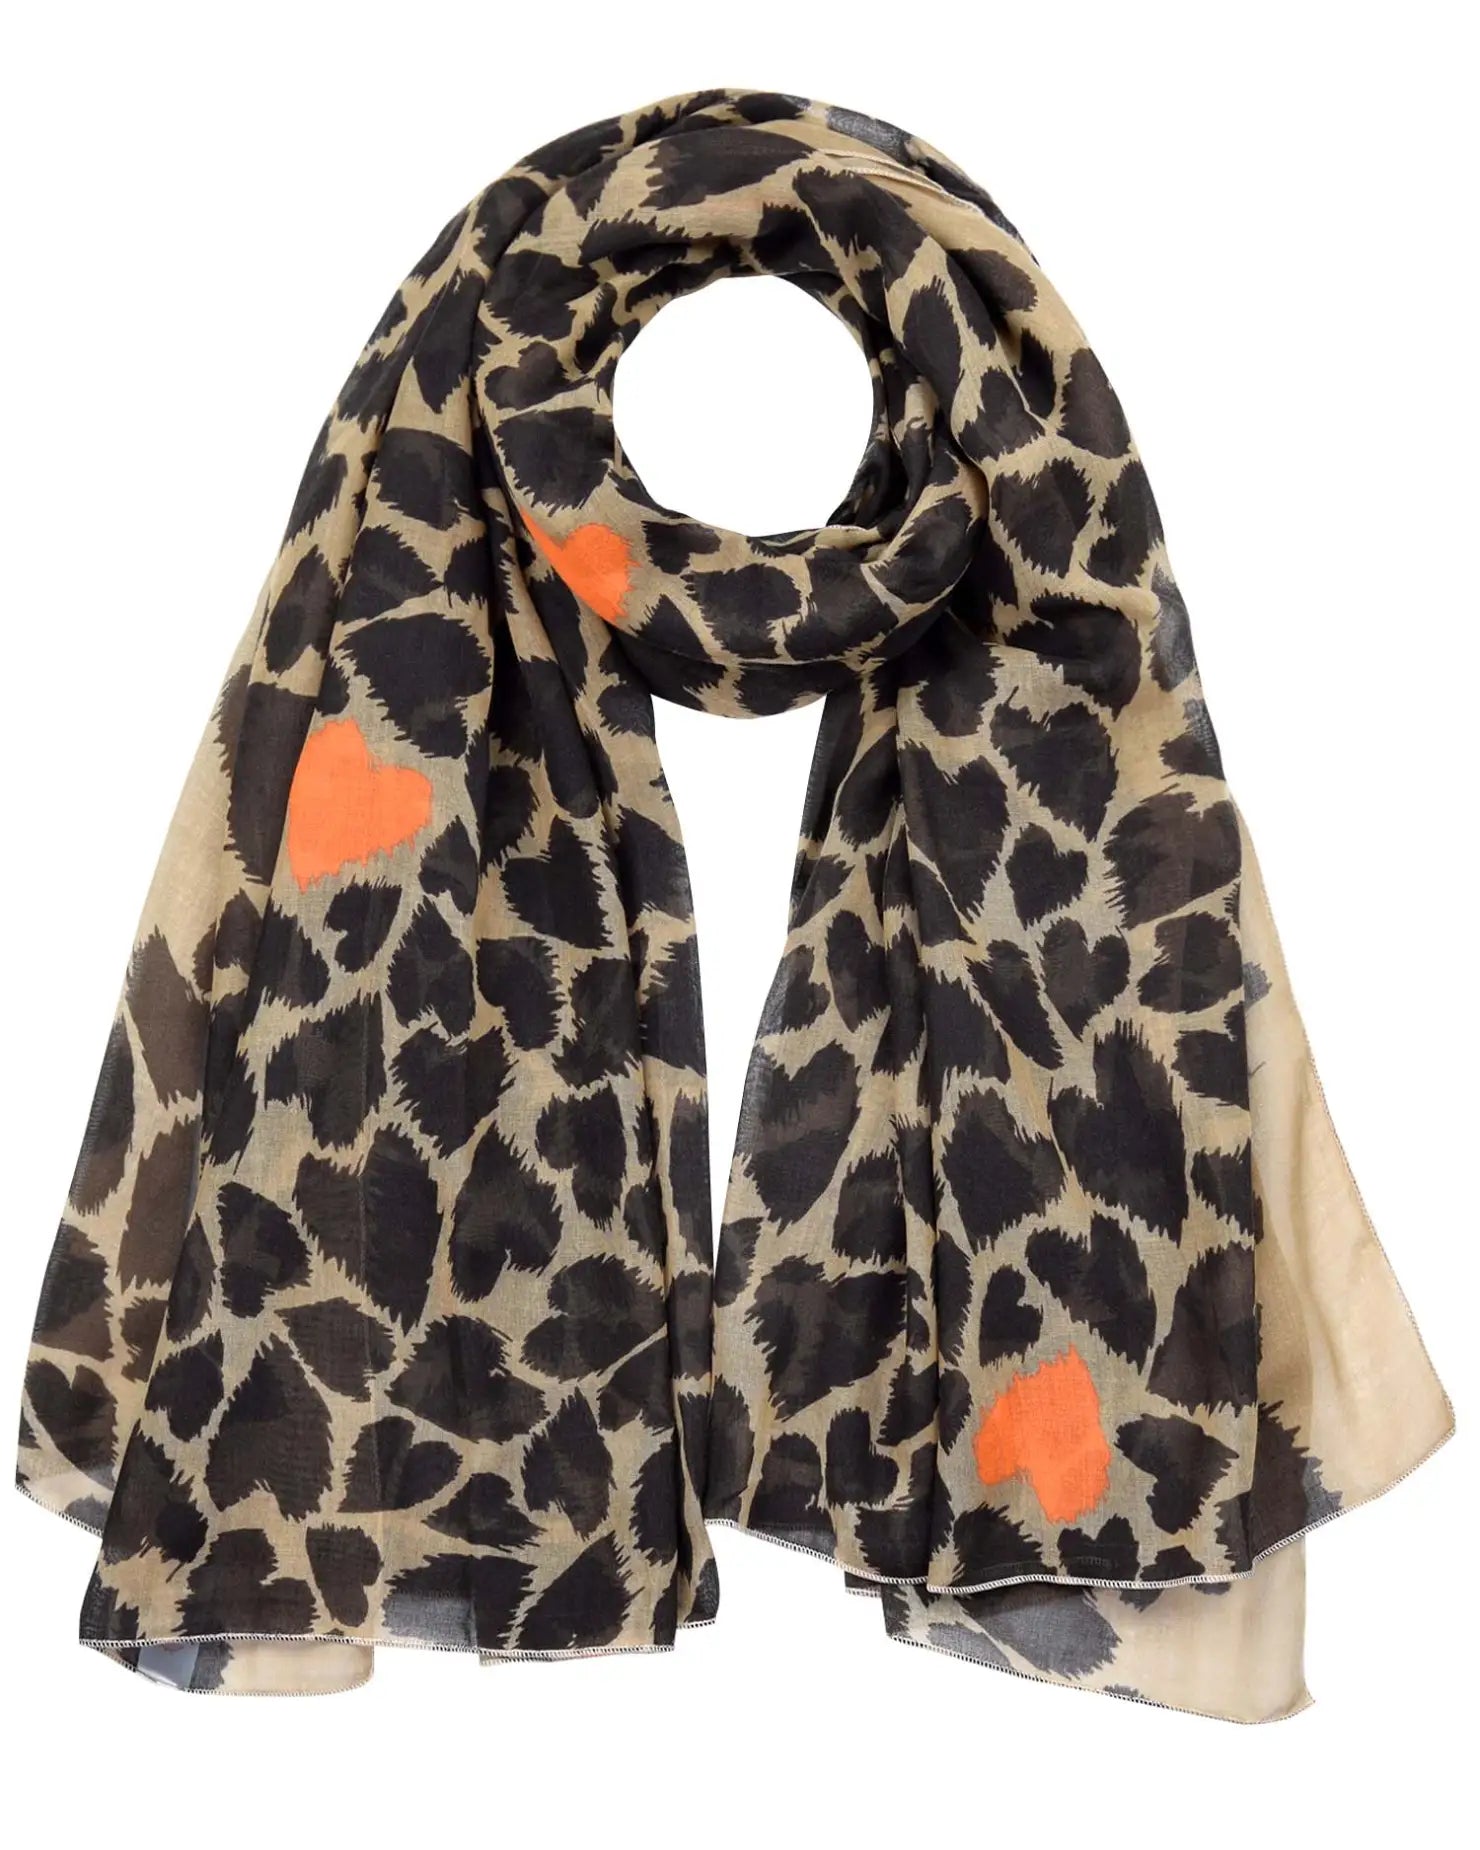 Leopard print scarf with heart design, part of Vibrant Oversized Heart Print Scarf Wrap.